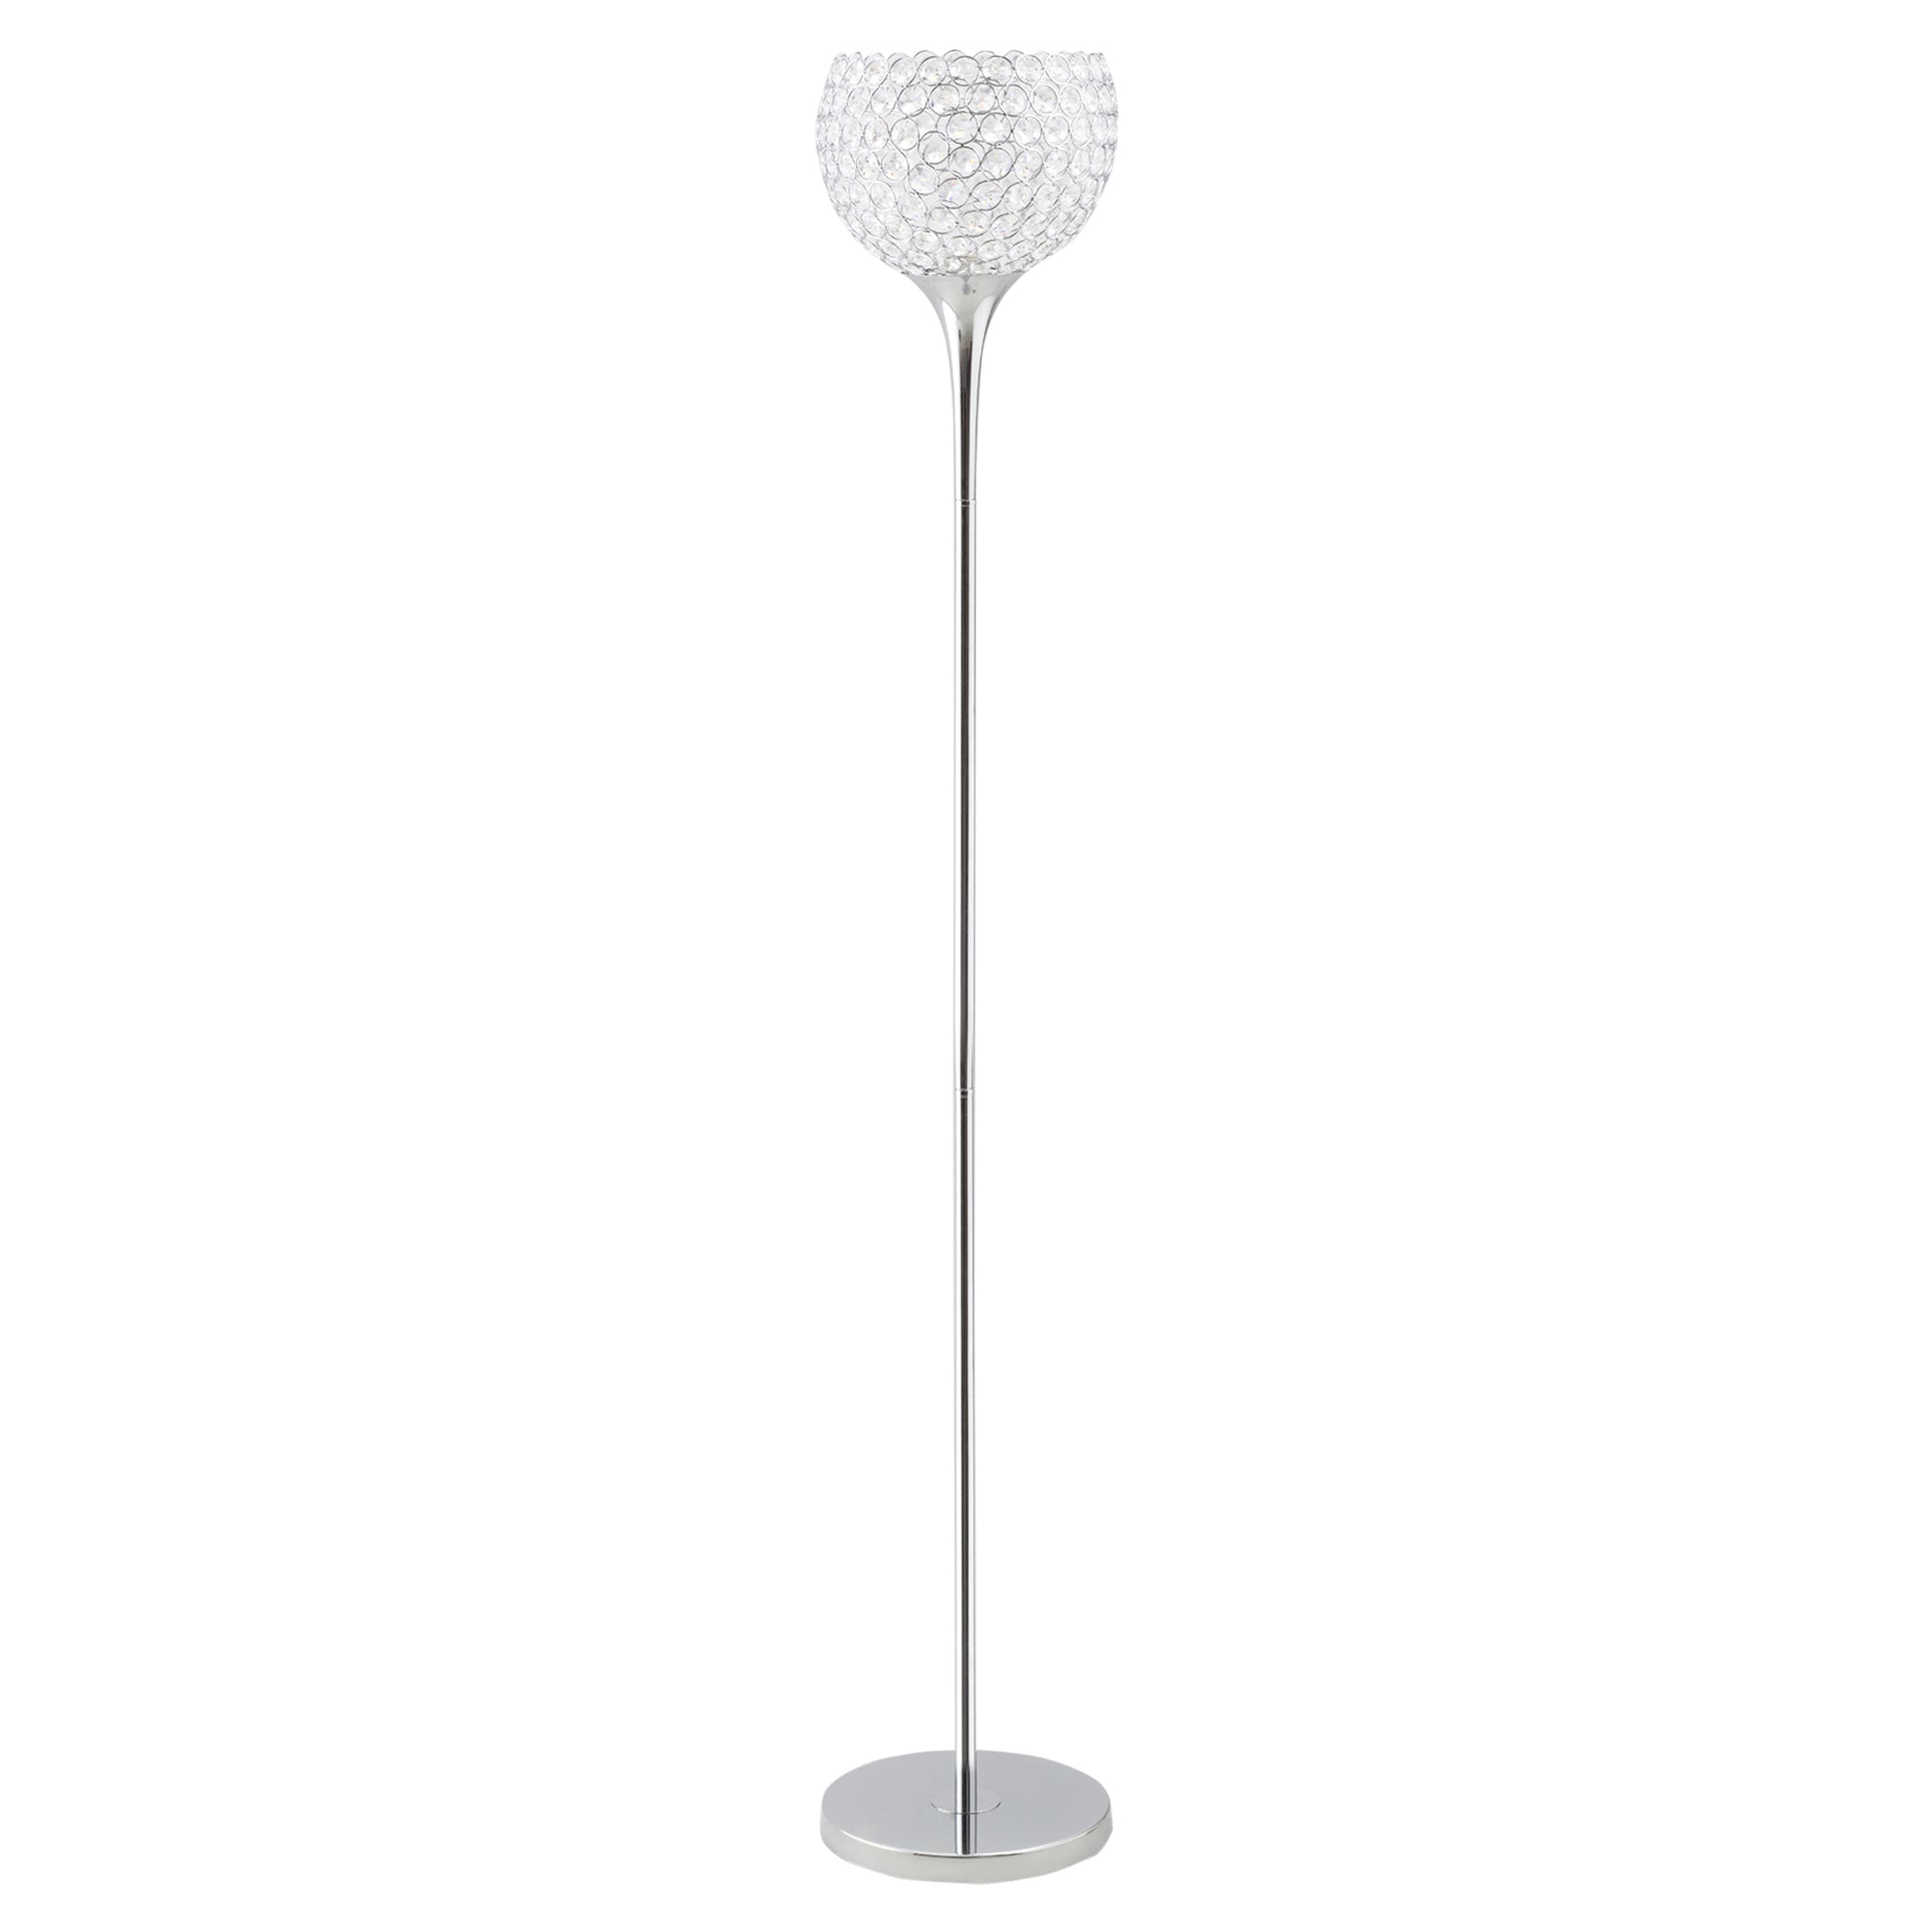 Modern Floor Lamp with K9 Crystal Lampshade, Tall Standing Lamp with E27 Bulb Base and Foot Switch for Living Room Bedroom Study Office Silver  AOSOM   